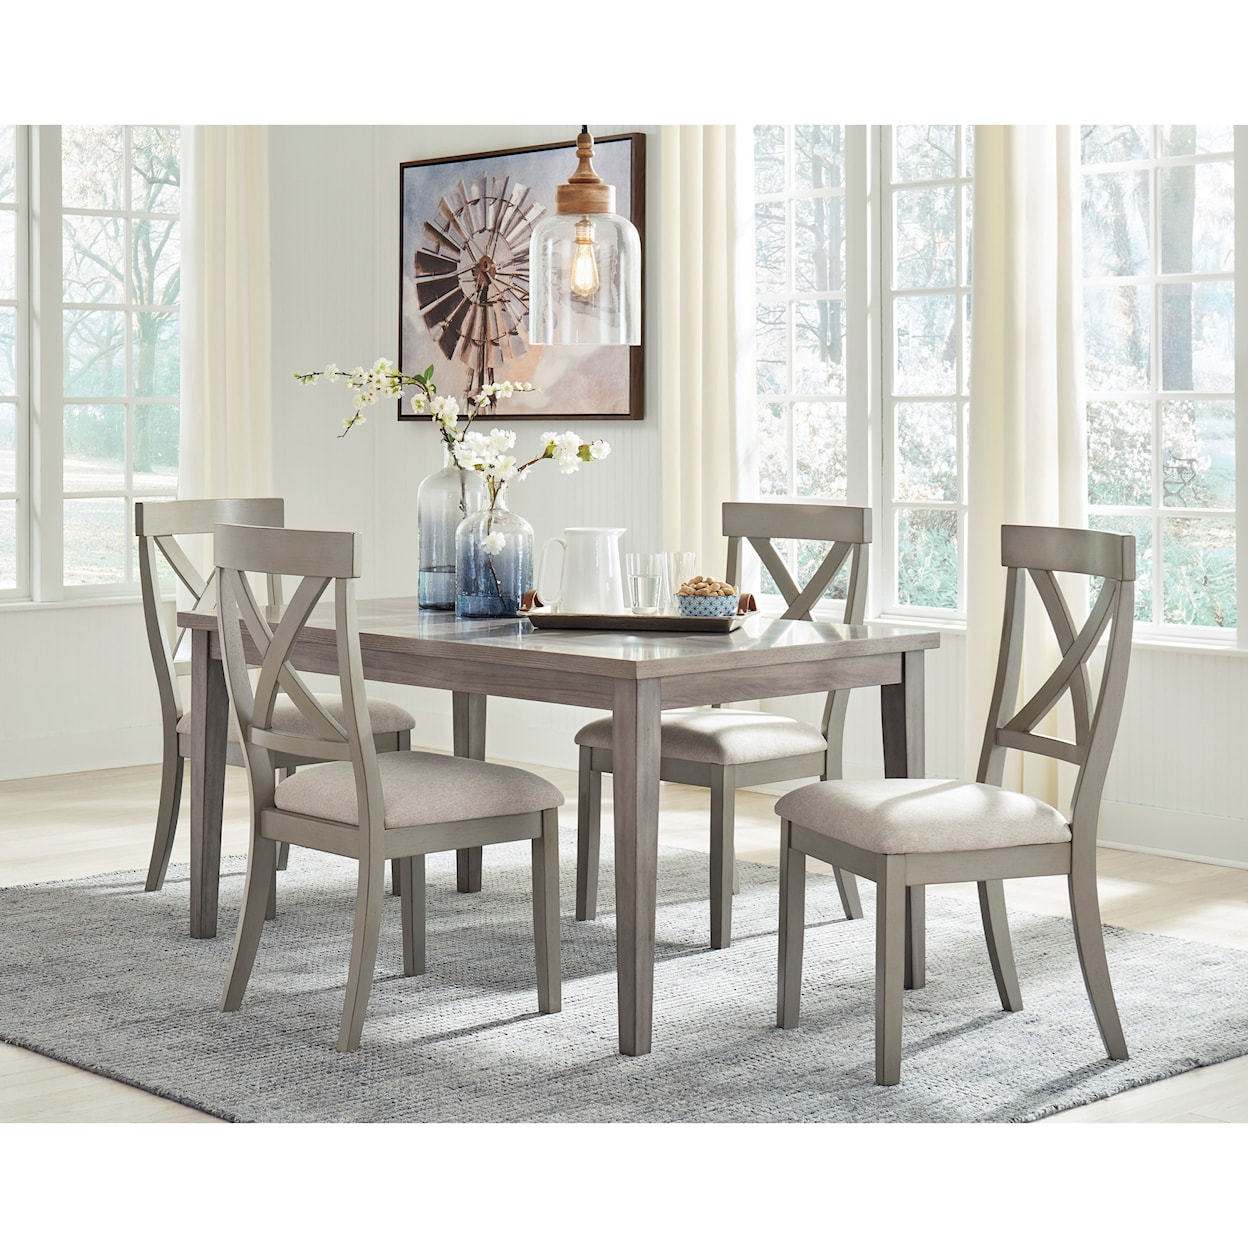 Signature Design by Ashley Furniture Parellen 5-Piece Table and Chair Set